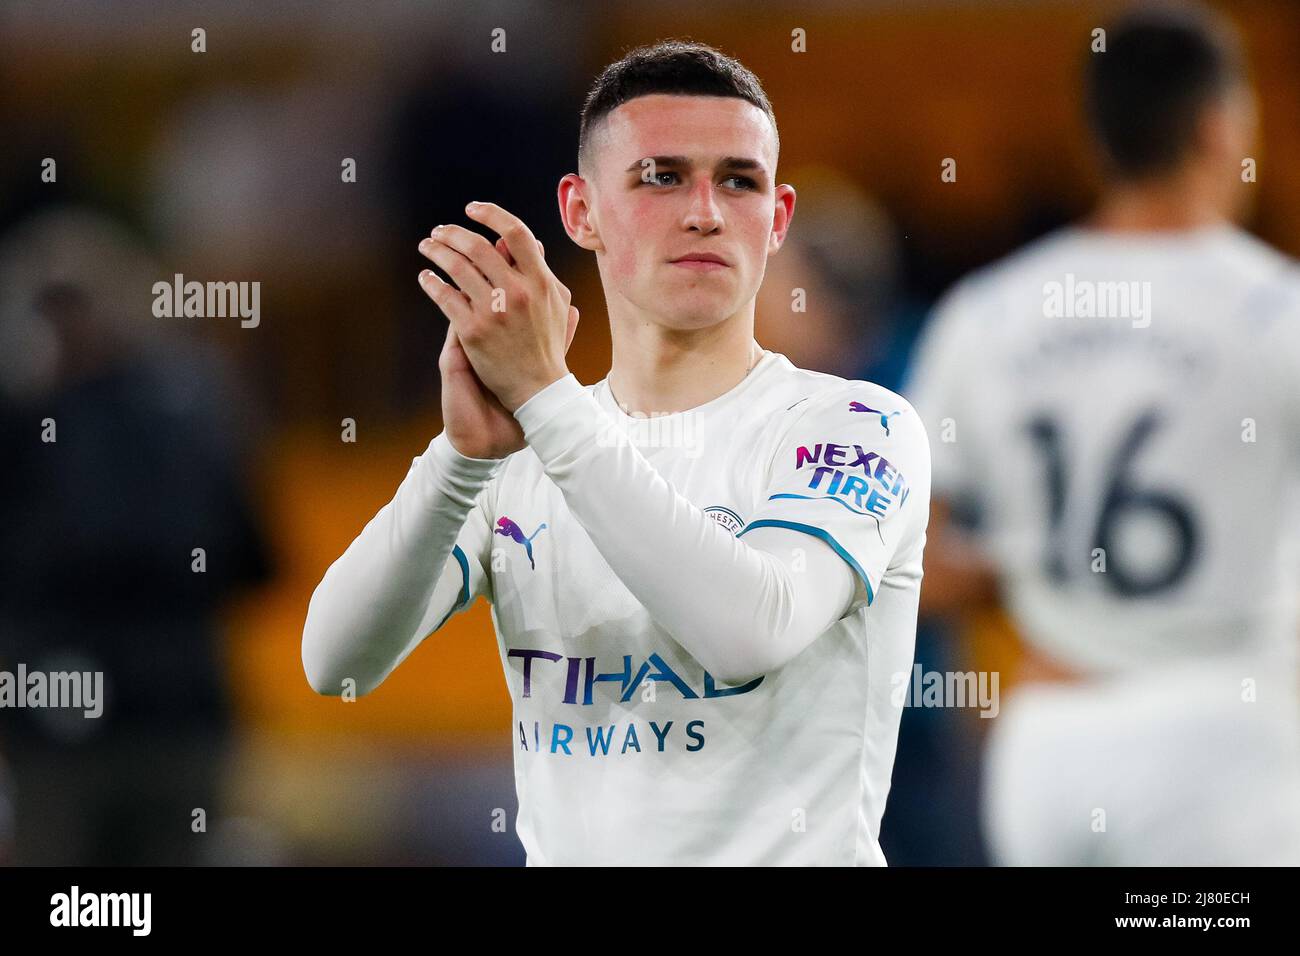 11th May 2022; Molineux Stadium, Wolverhampton, West Midlands, England; Premier League Football, Wolverhampton Wanderers versus Manchester City: Phil Foden of Manchester City applauds the travelling Manchester City fans after the final whistle Stock Photo